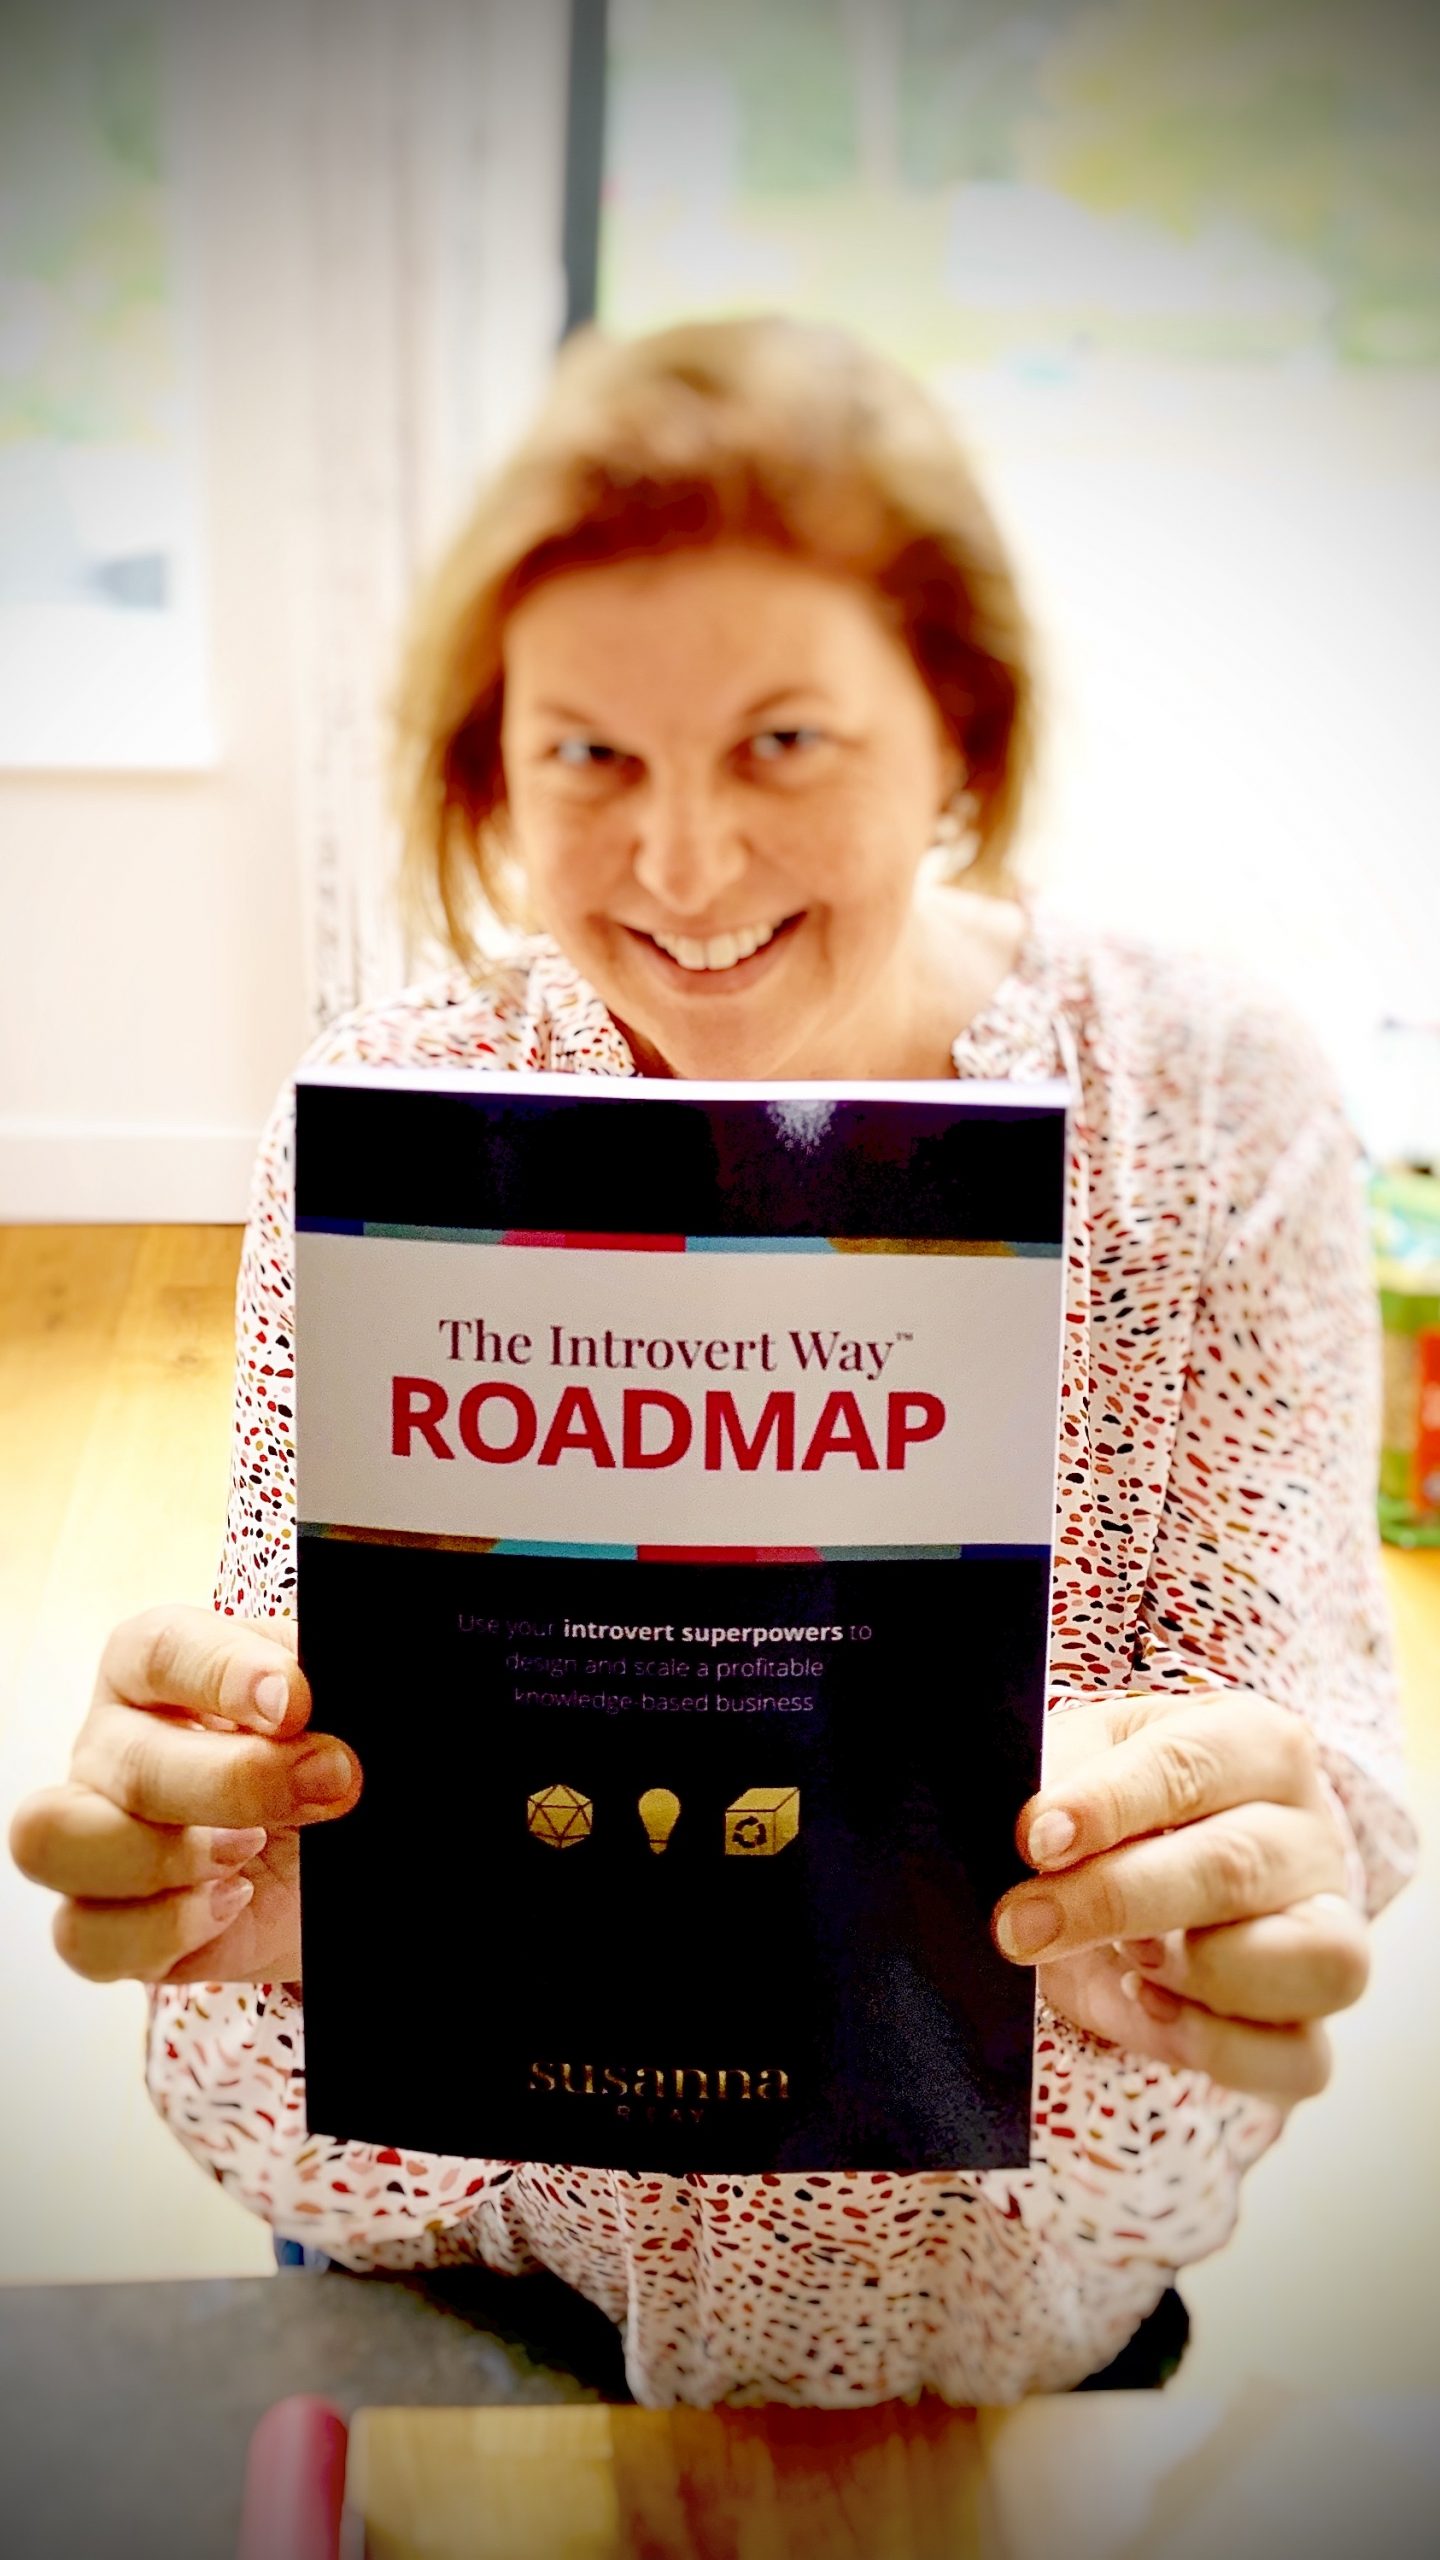 The Introvert Way Roadmap book